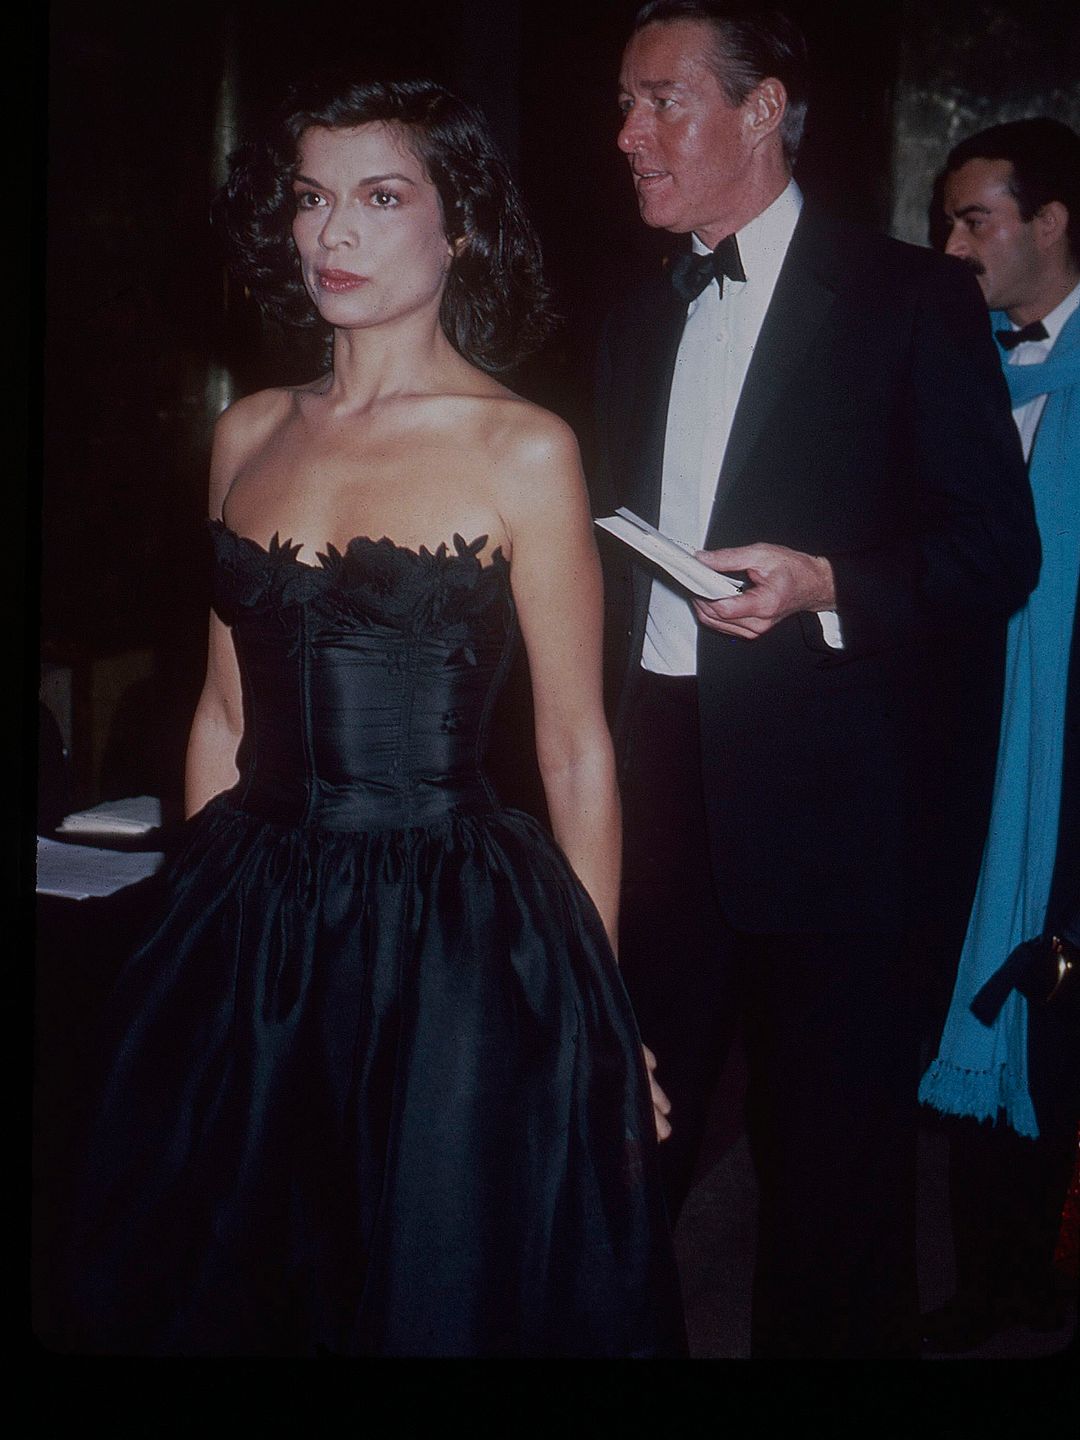 View of Nicaraguan model and actress Bianca Jagger and fashion designer Halston (born Roy Halston Frowick, 1932 - 1990) as they attend a Costume Institute gala at the Metropolitan Museum of Art, New York, New York, 1981. (Photo by Rose Hartman/Getty Image